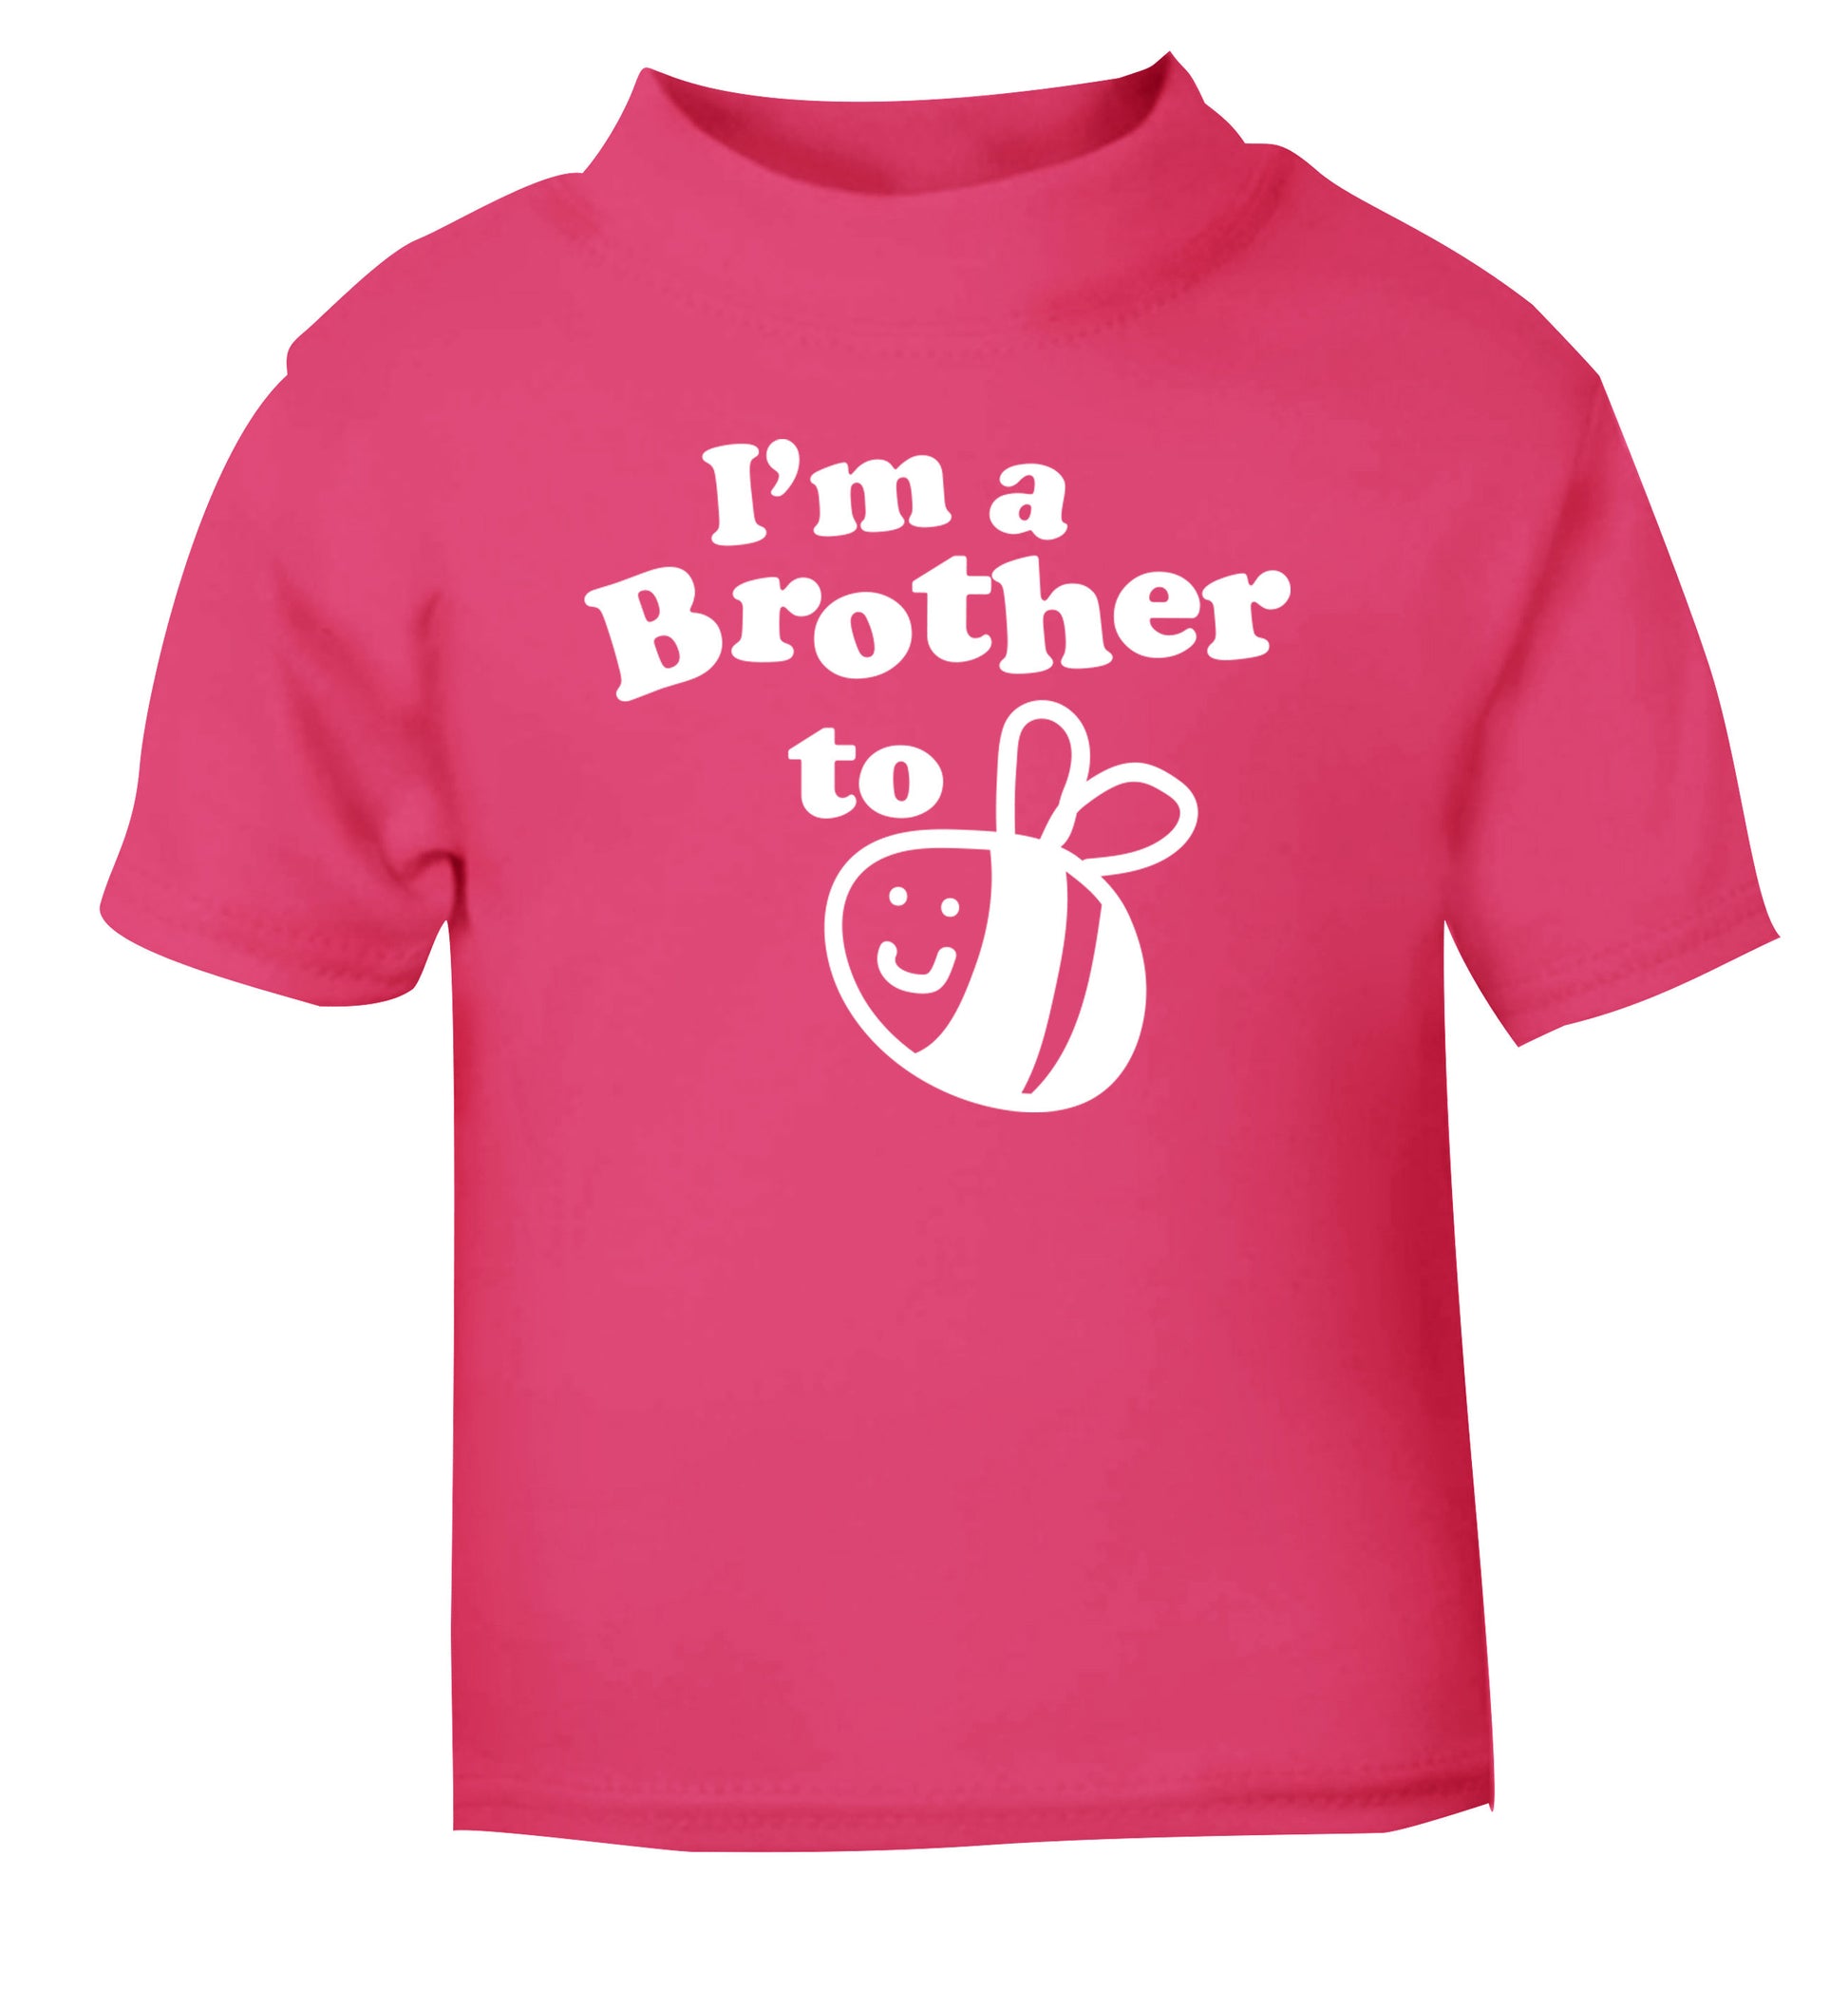 I'm a brother to be pink Baby Toddler Tshirt 2 Years